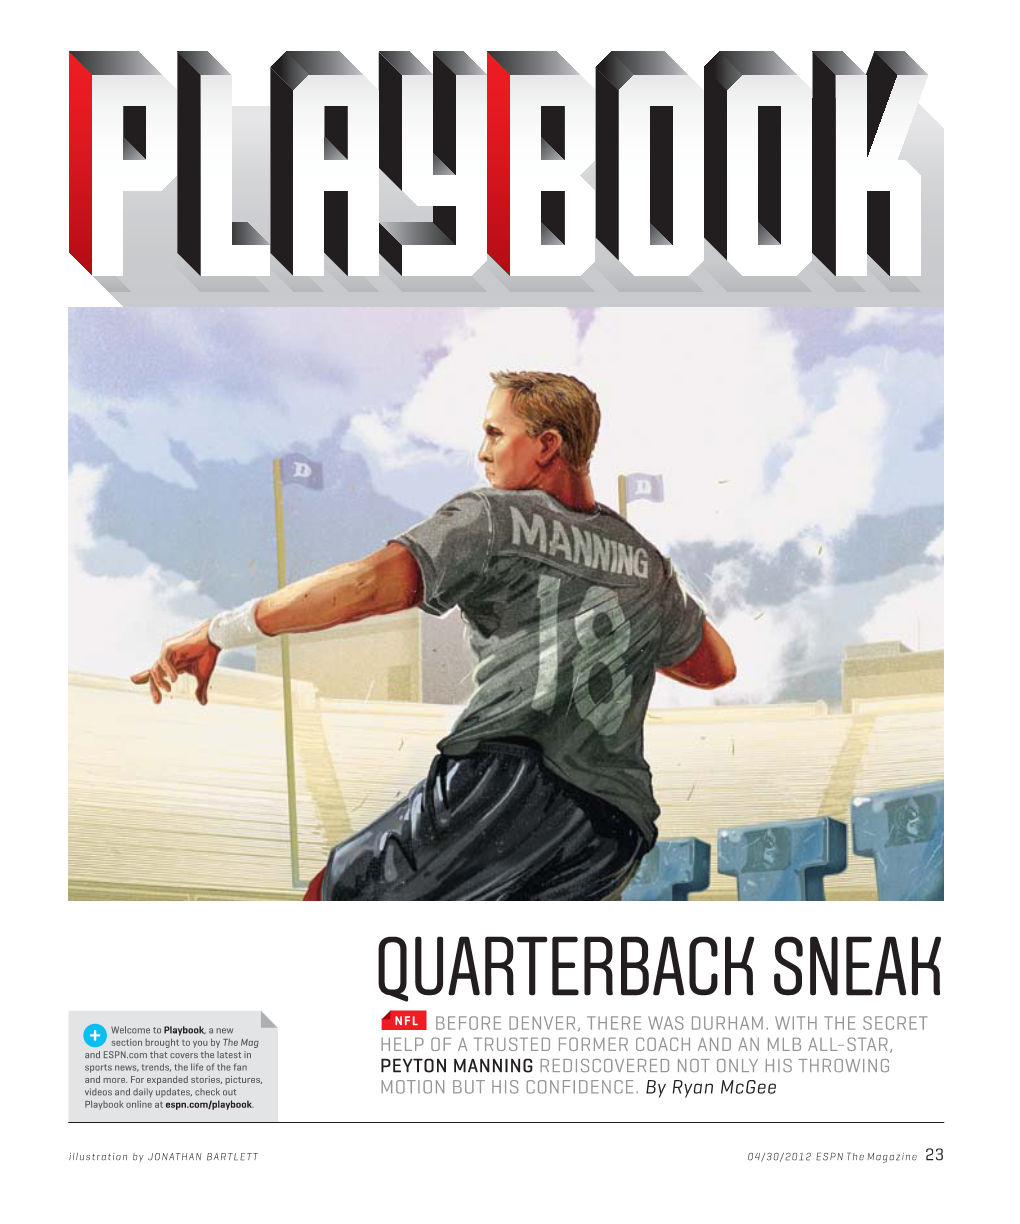 QUARTERBACK SNEAK NFL Welcome to Playbook, a New BEFORE DENVER, THERE WAS DURHAM